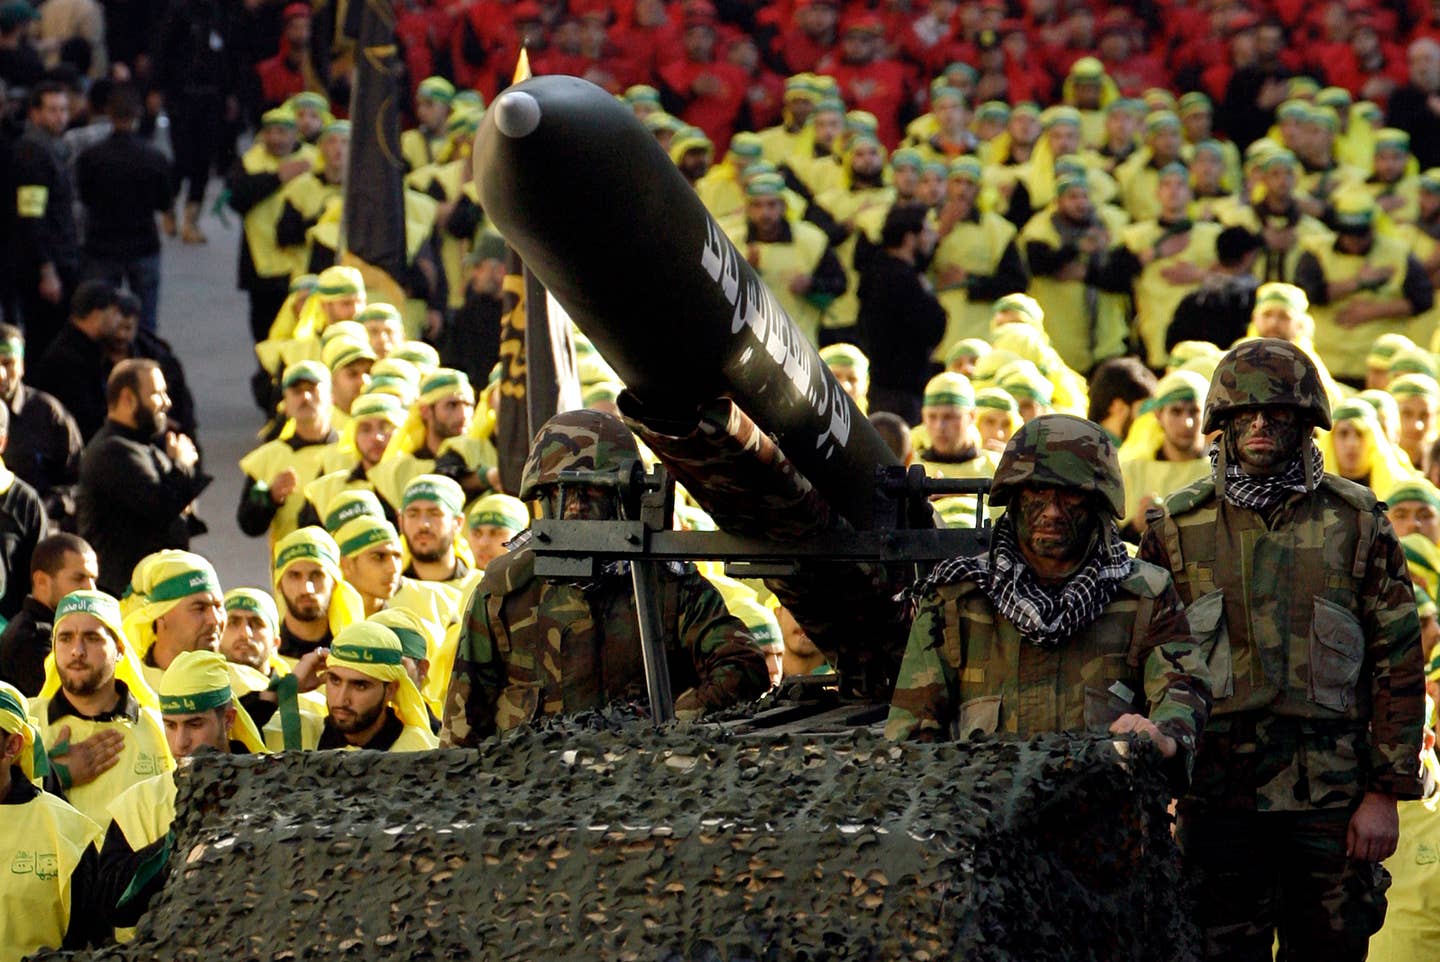 Hezbollah militants ride on a vehicle carrying a Fajr-5 rocket during the annual parade in the southern town of Nabatiyeh on November 28, 2012. <em>MAHMOUD ZAYYAT/AFP via Getty Images</em>